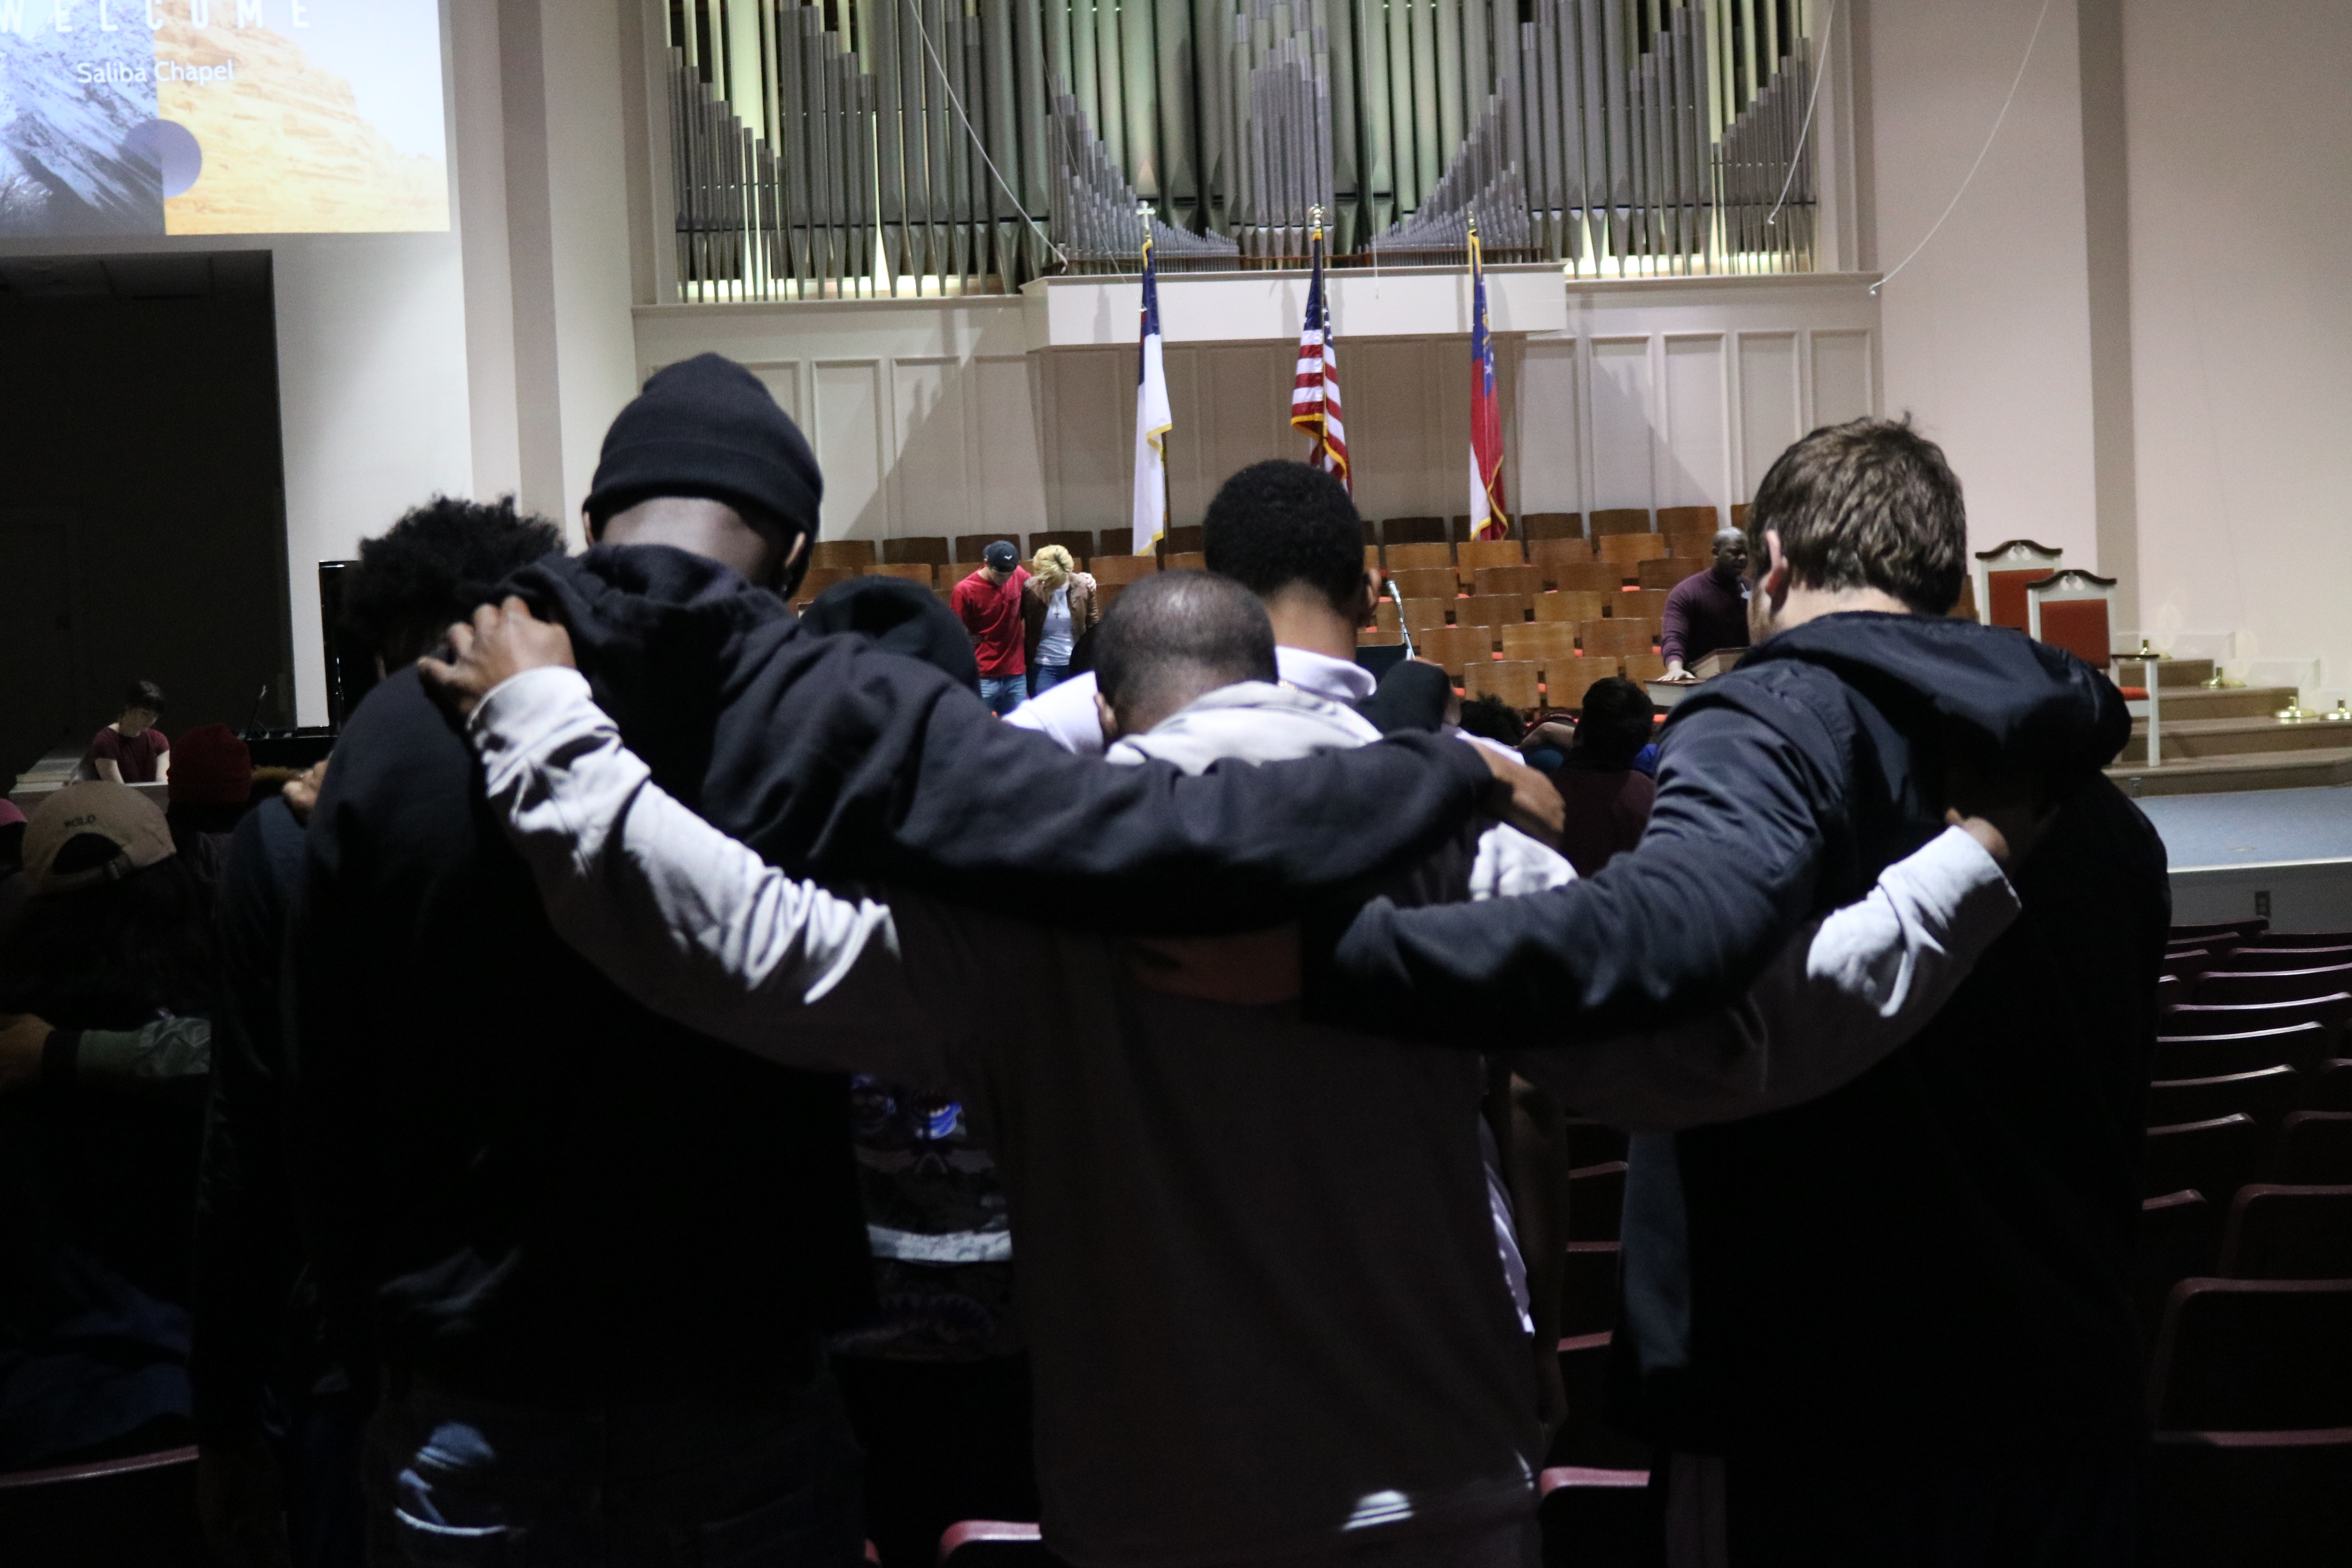 A group of Brewton-Parker students link arms as they pray during the February 13 chapel service. Photo Credit: Jose Carrillo-Garcia